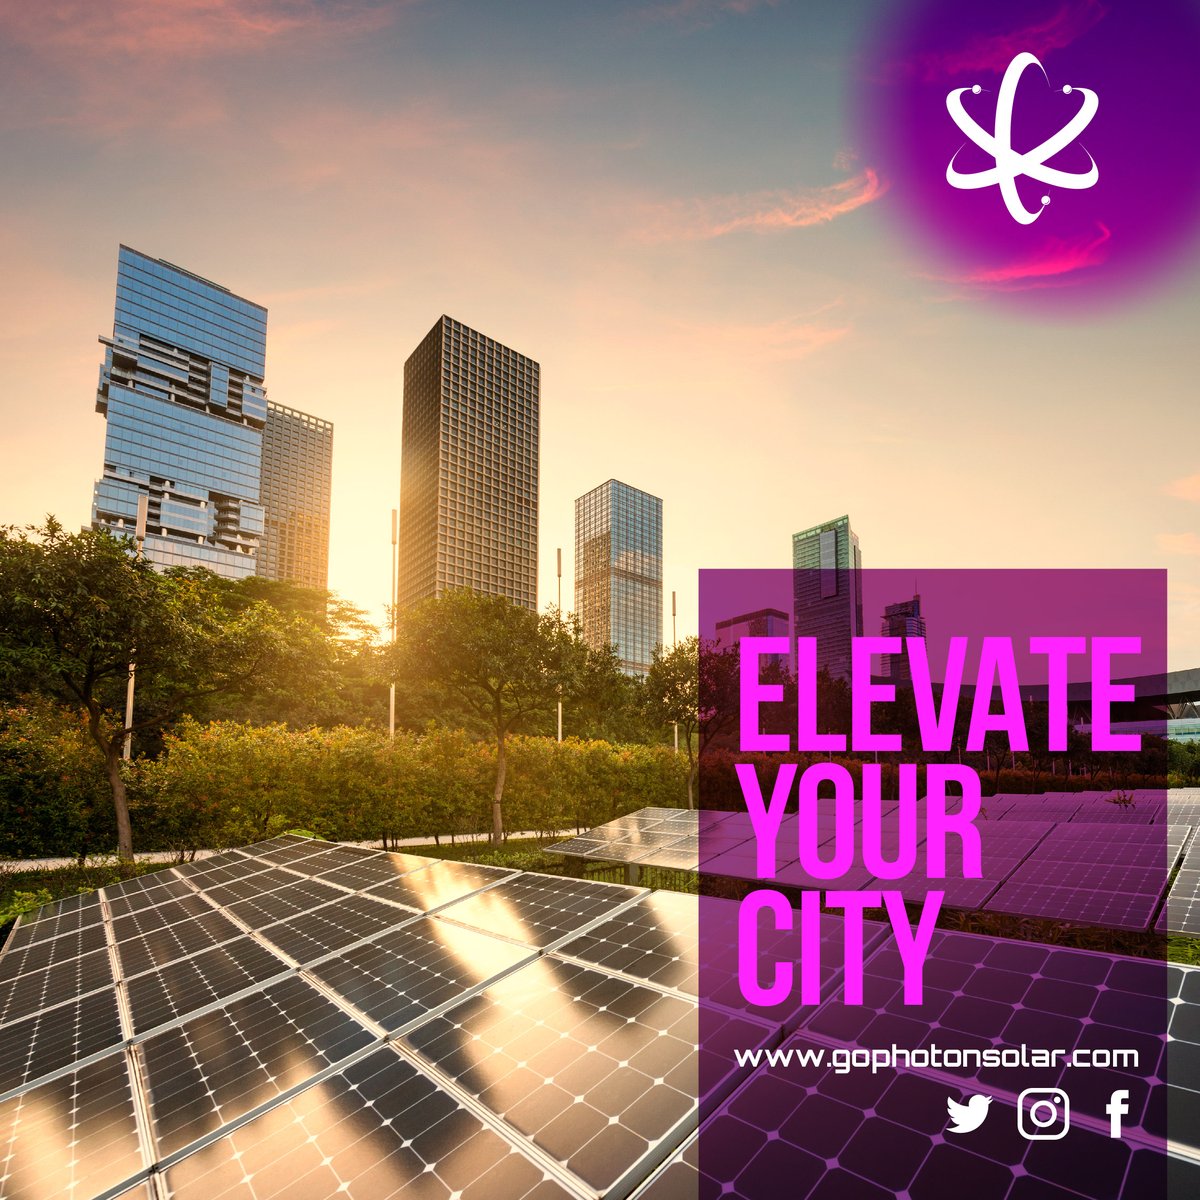 Elevate your city living with rooftop solar. Join the movement toward a greener urban landscape. #UrbanSolar #CityLiving #GreenCity